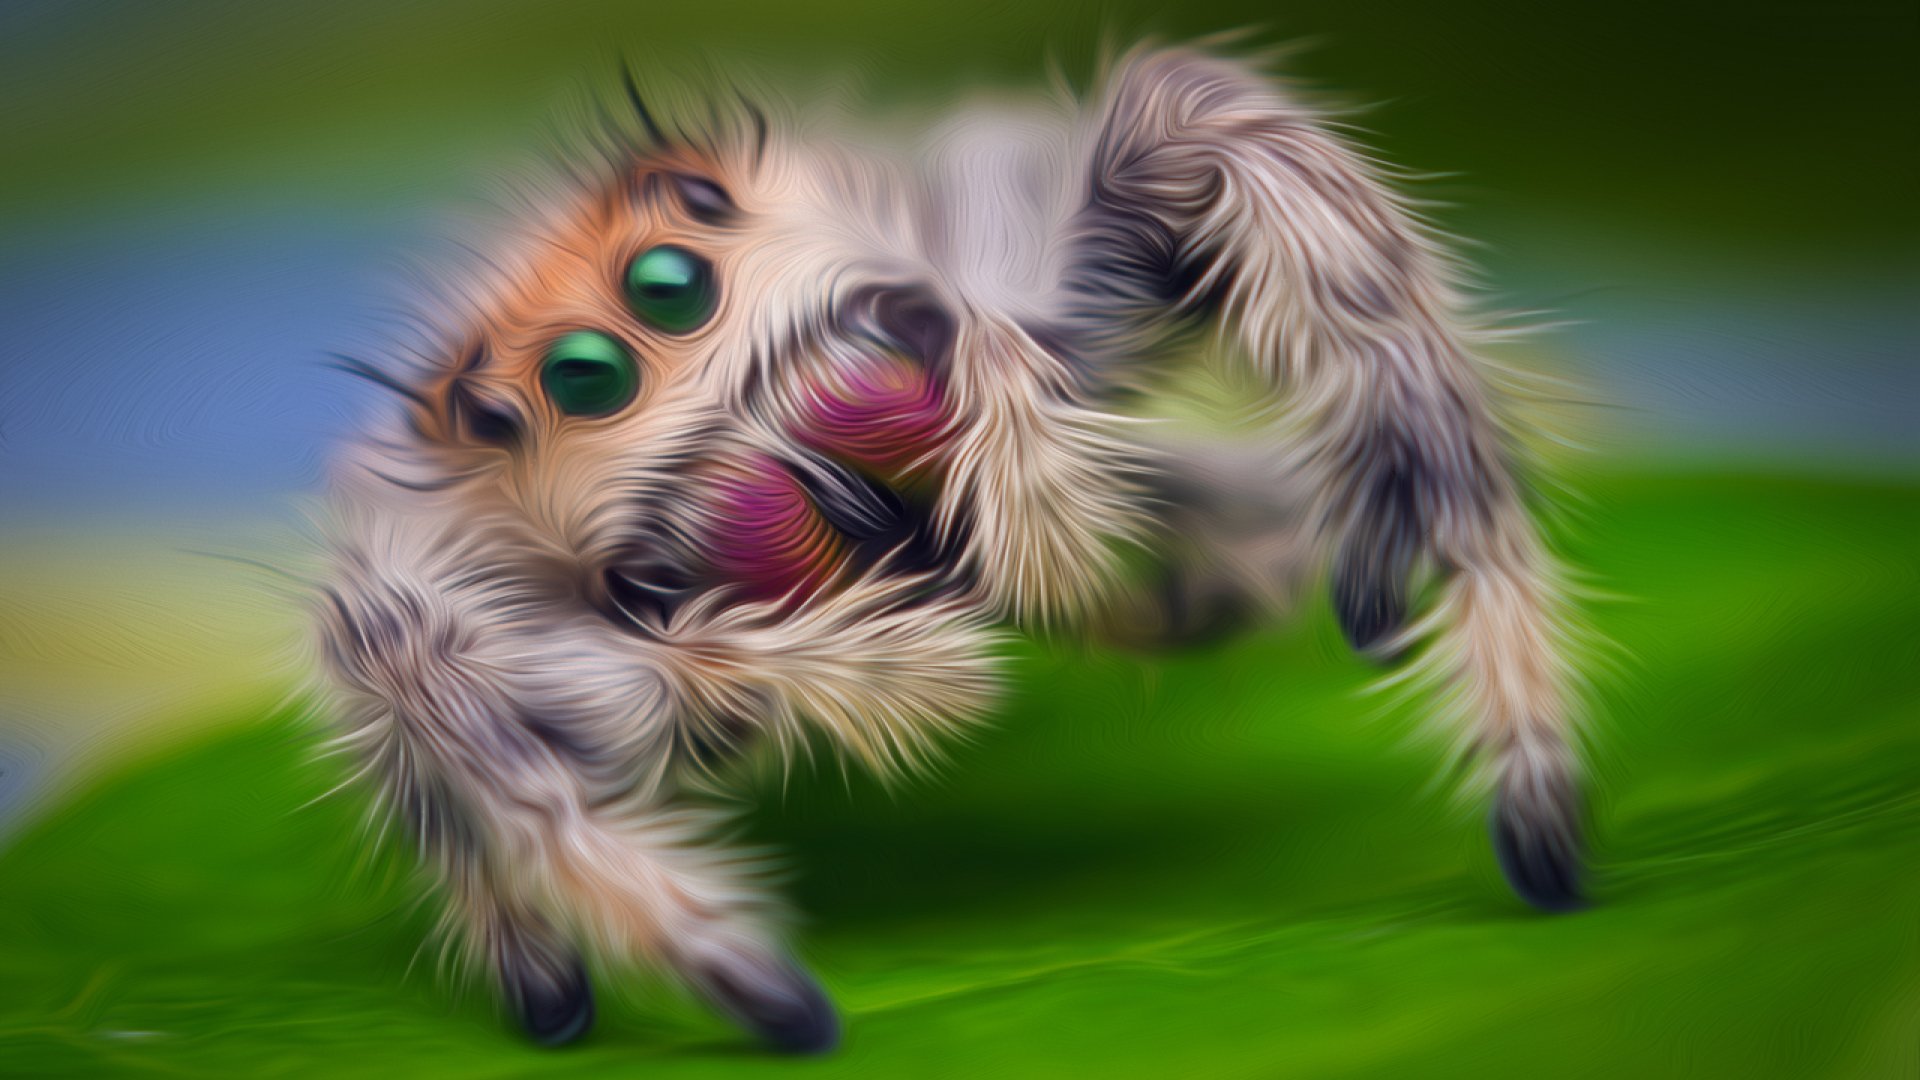 Scary Spider Wallpaper Download on 24wallpaper